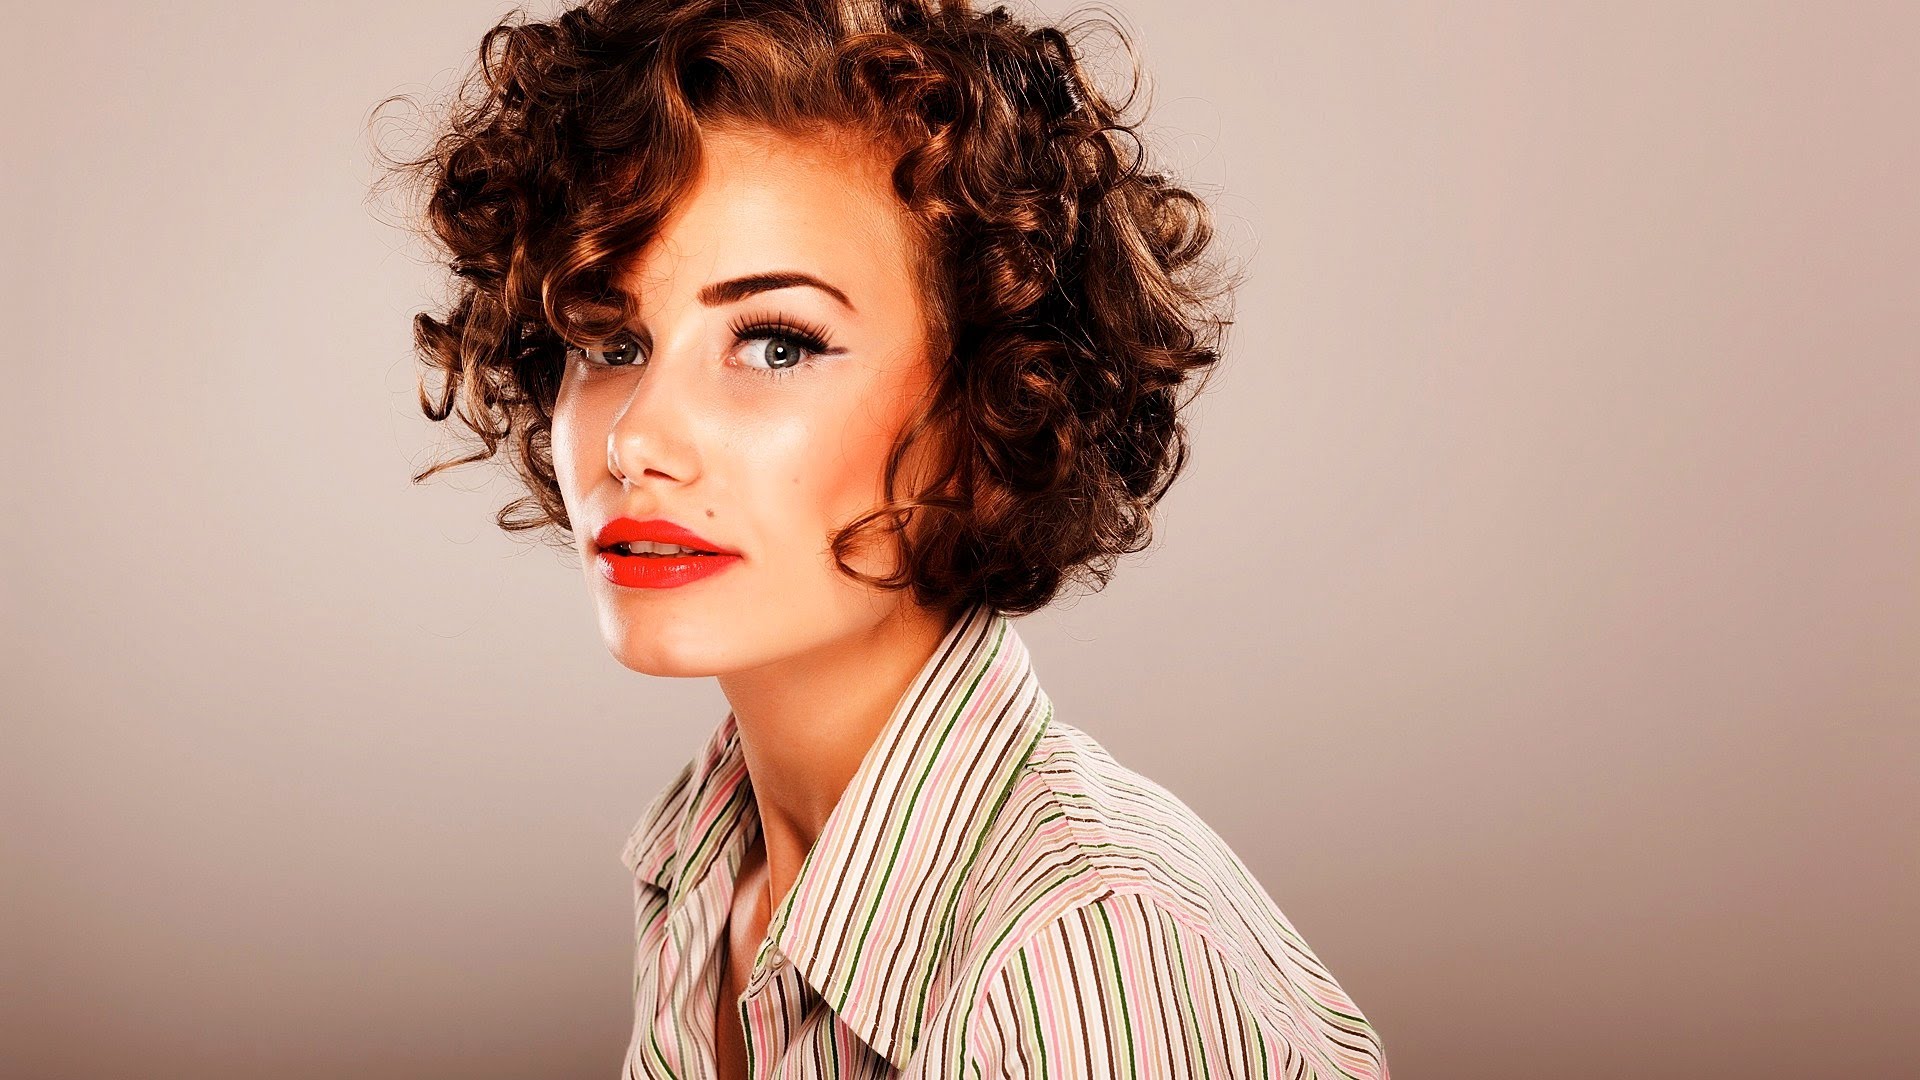 Marvelous Looking Short Hairstyles for Curly Hair